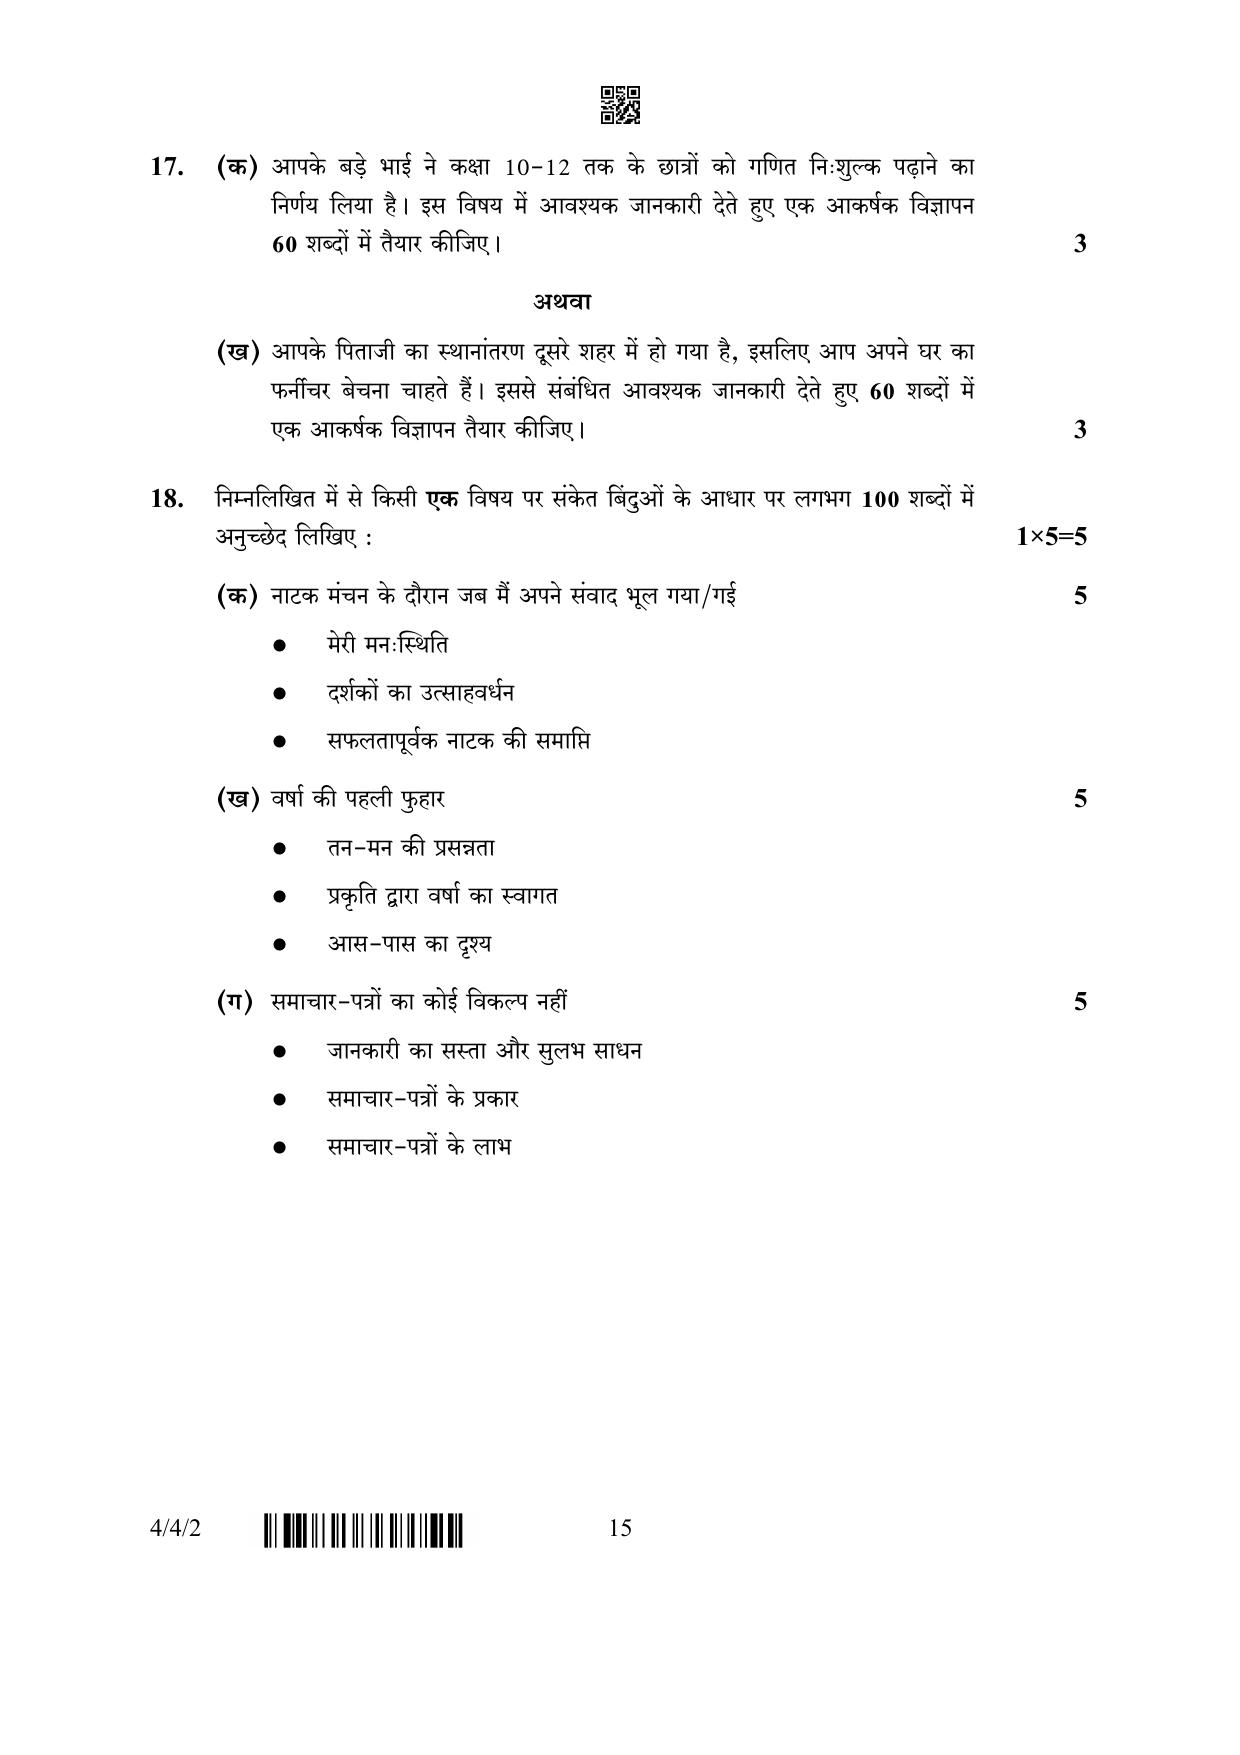 CBSE Class 10 4-4-2 Hindi B 2023 Question Paper - Page 15